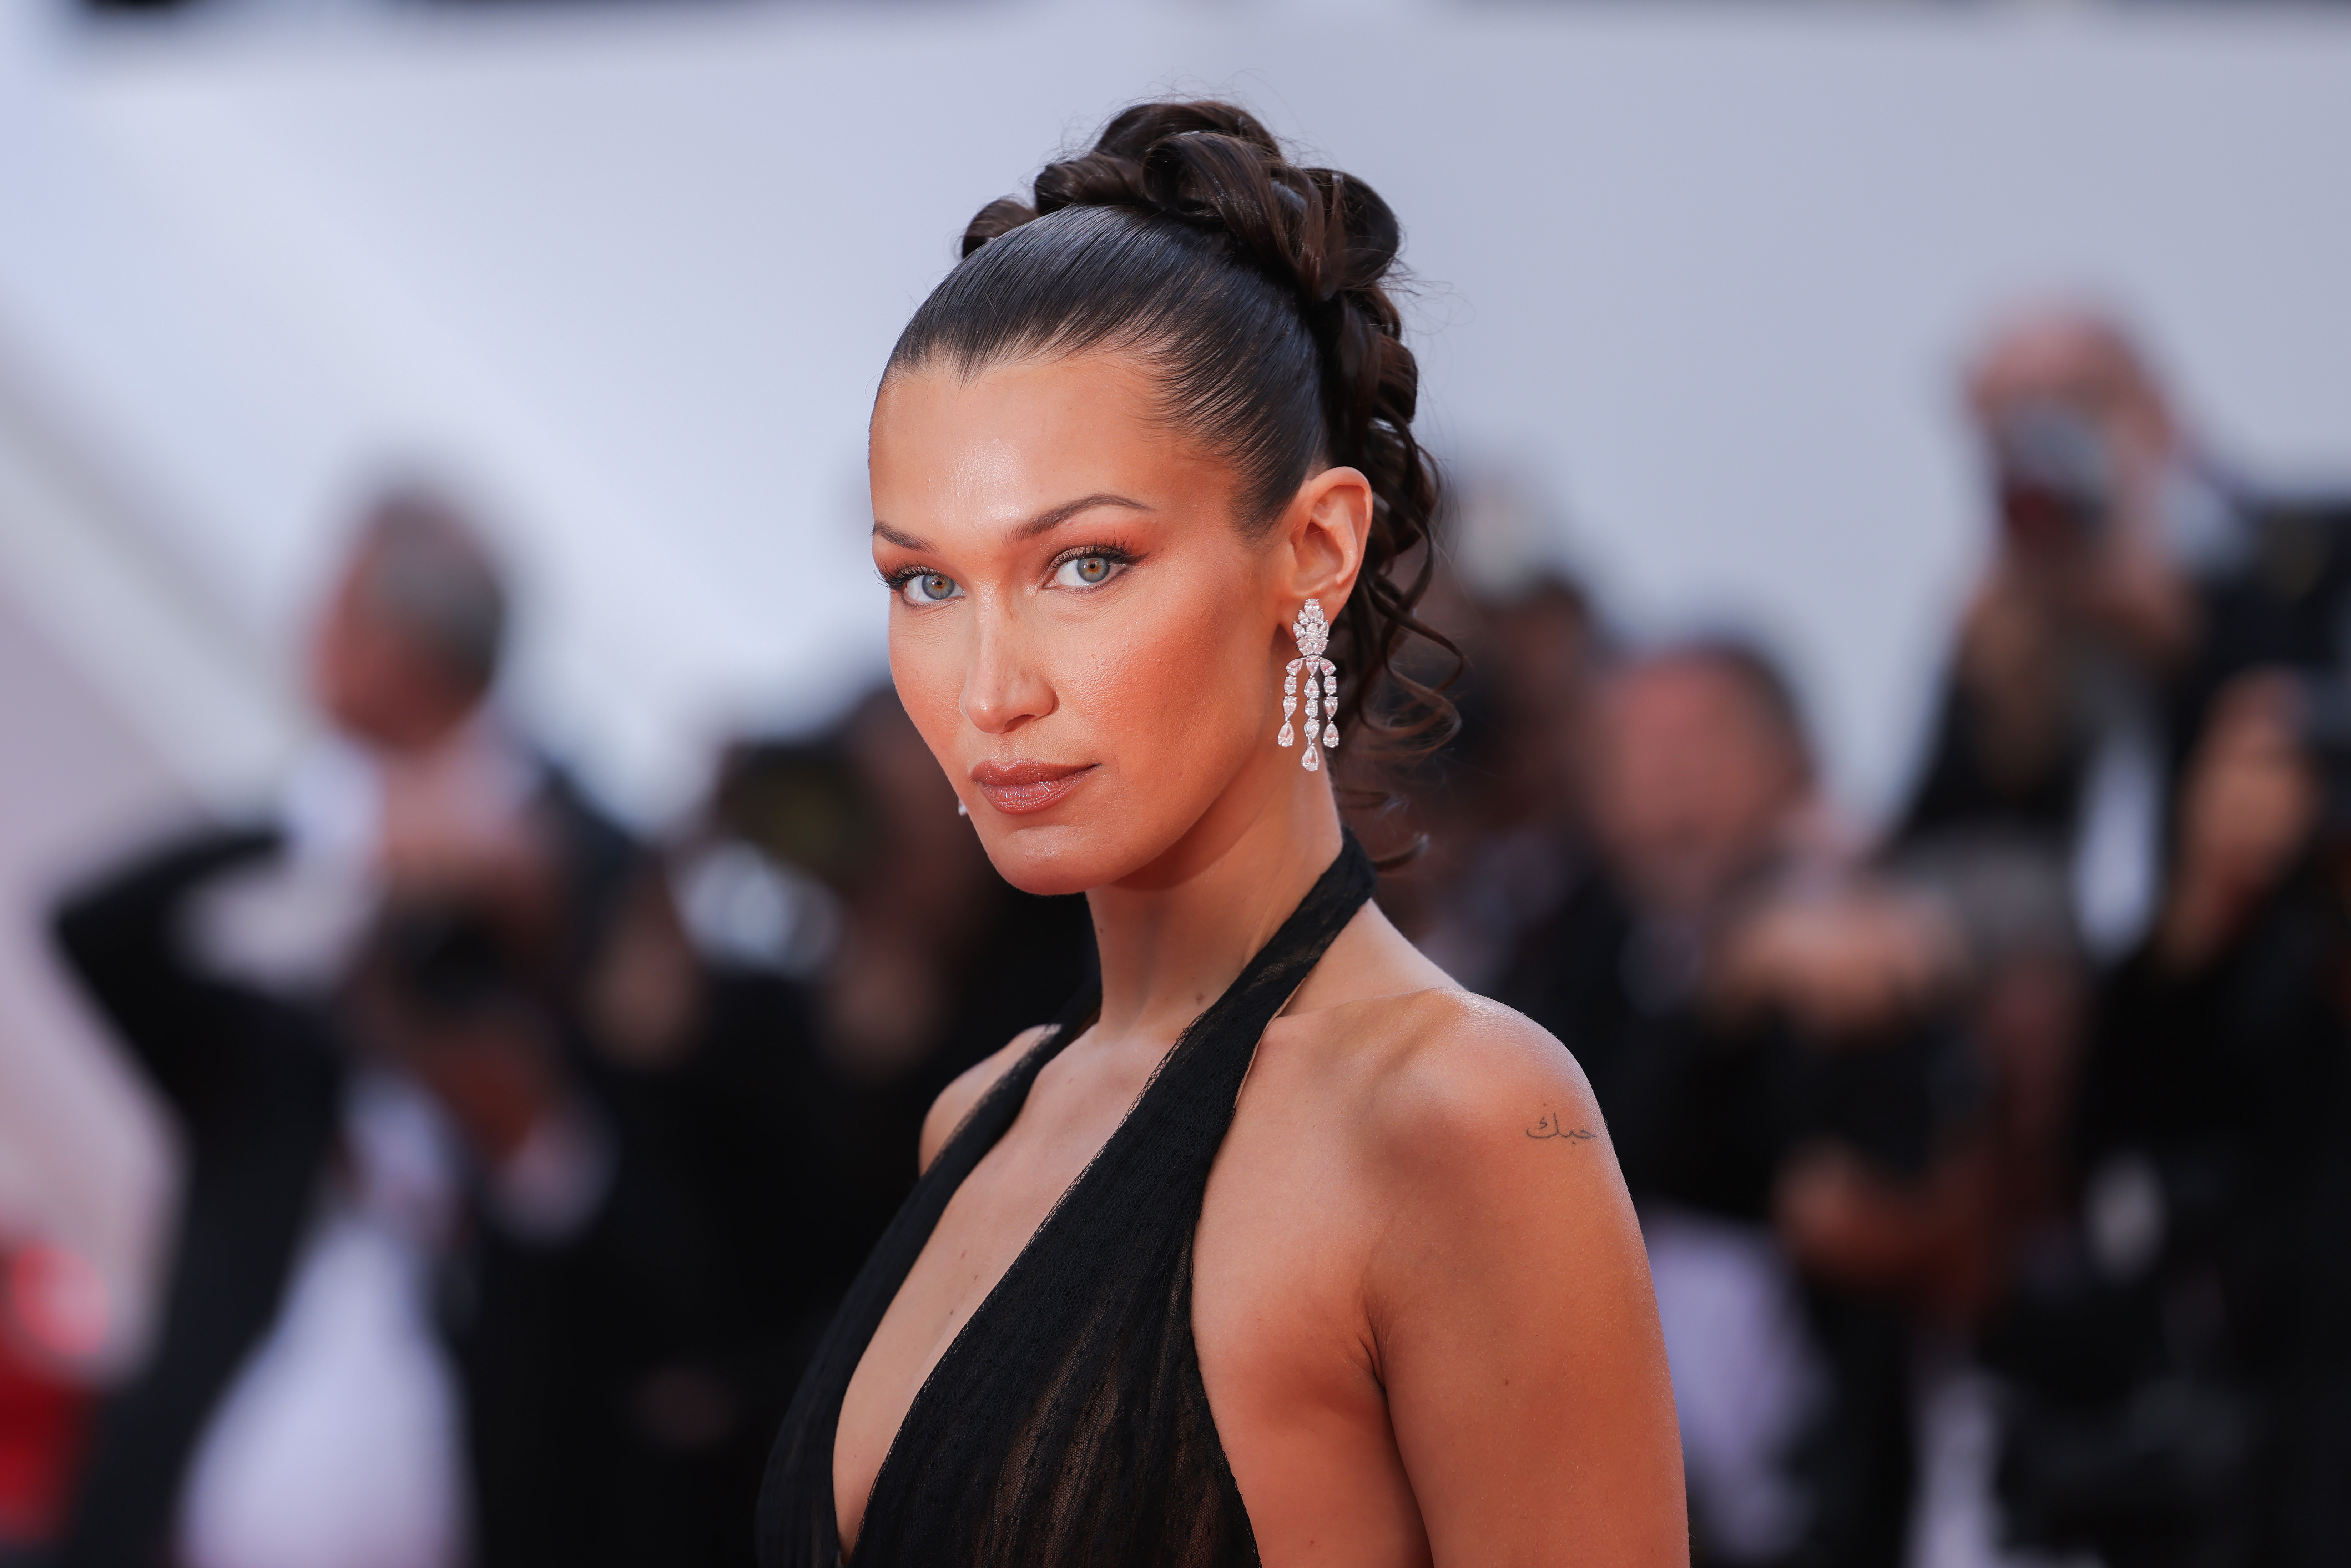 Adidas apologizes to Bella Hadid for dropping her from shoe ad criticized by Israel